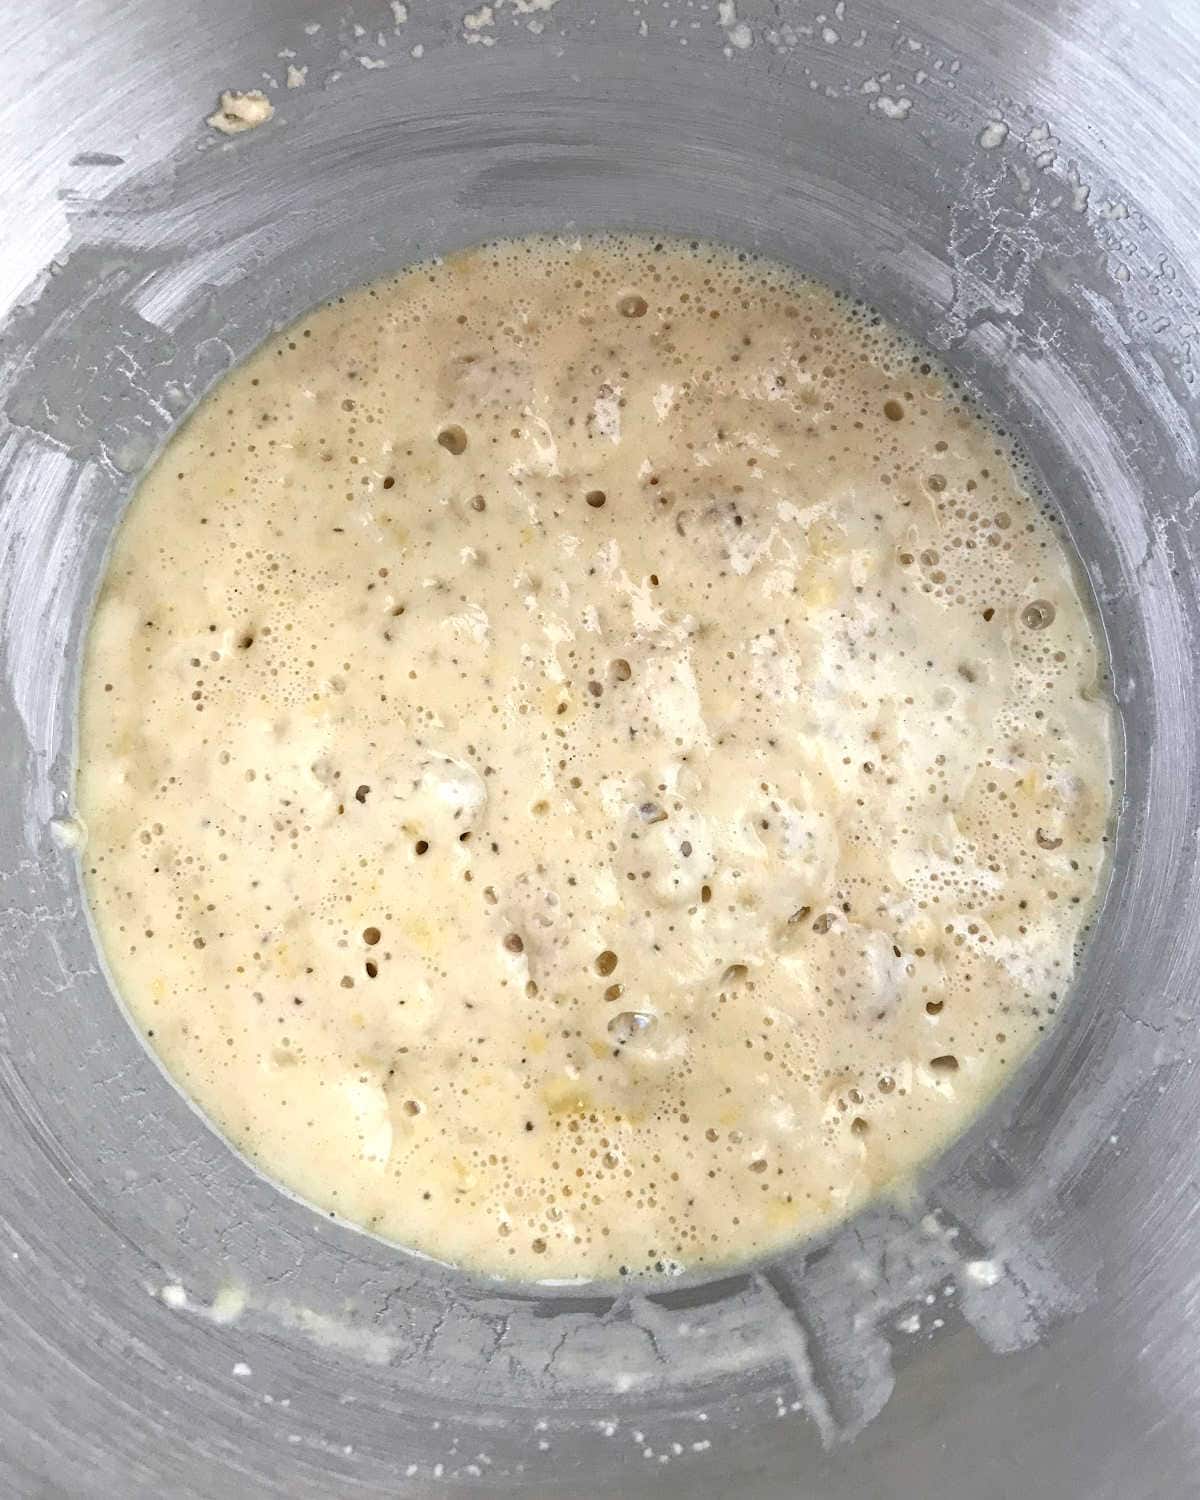 Bubbly yeast mixture in a metal bowl. Top view.